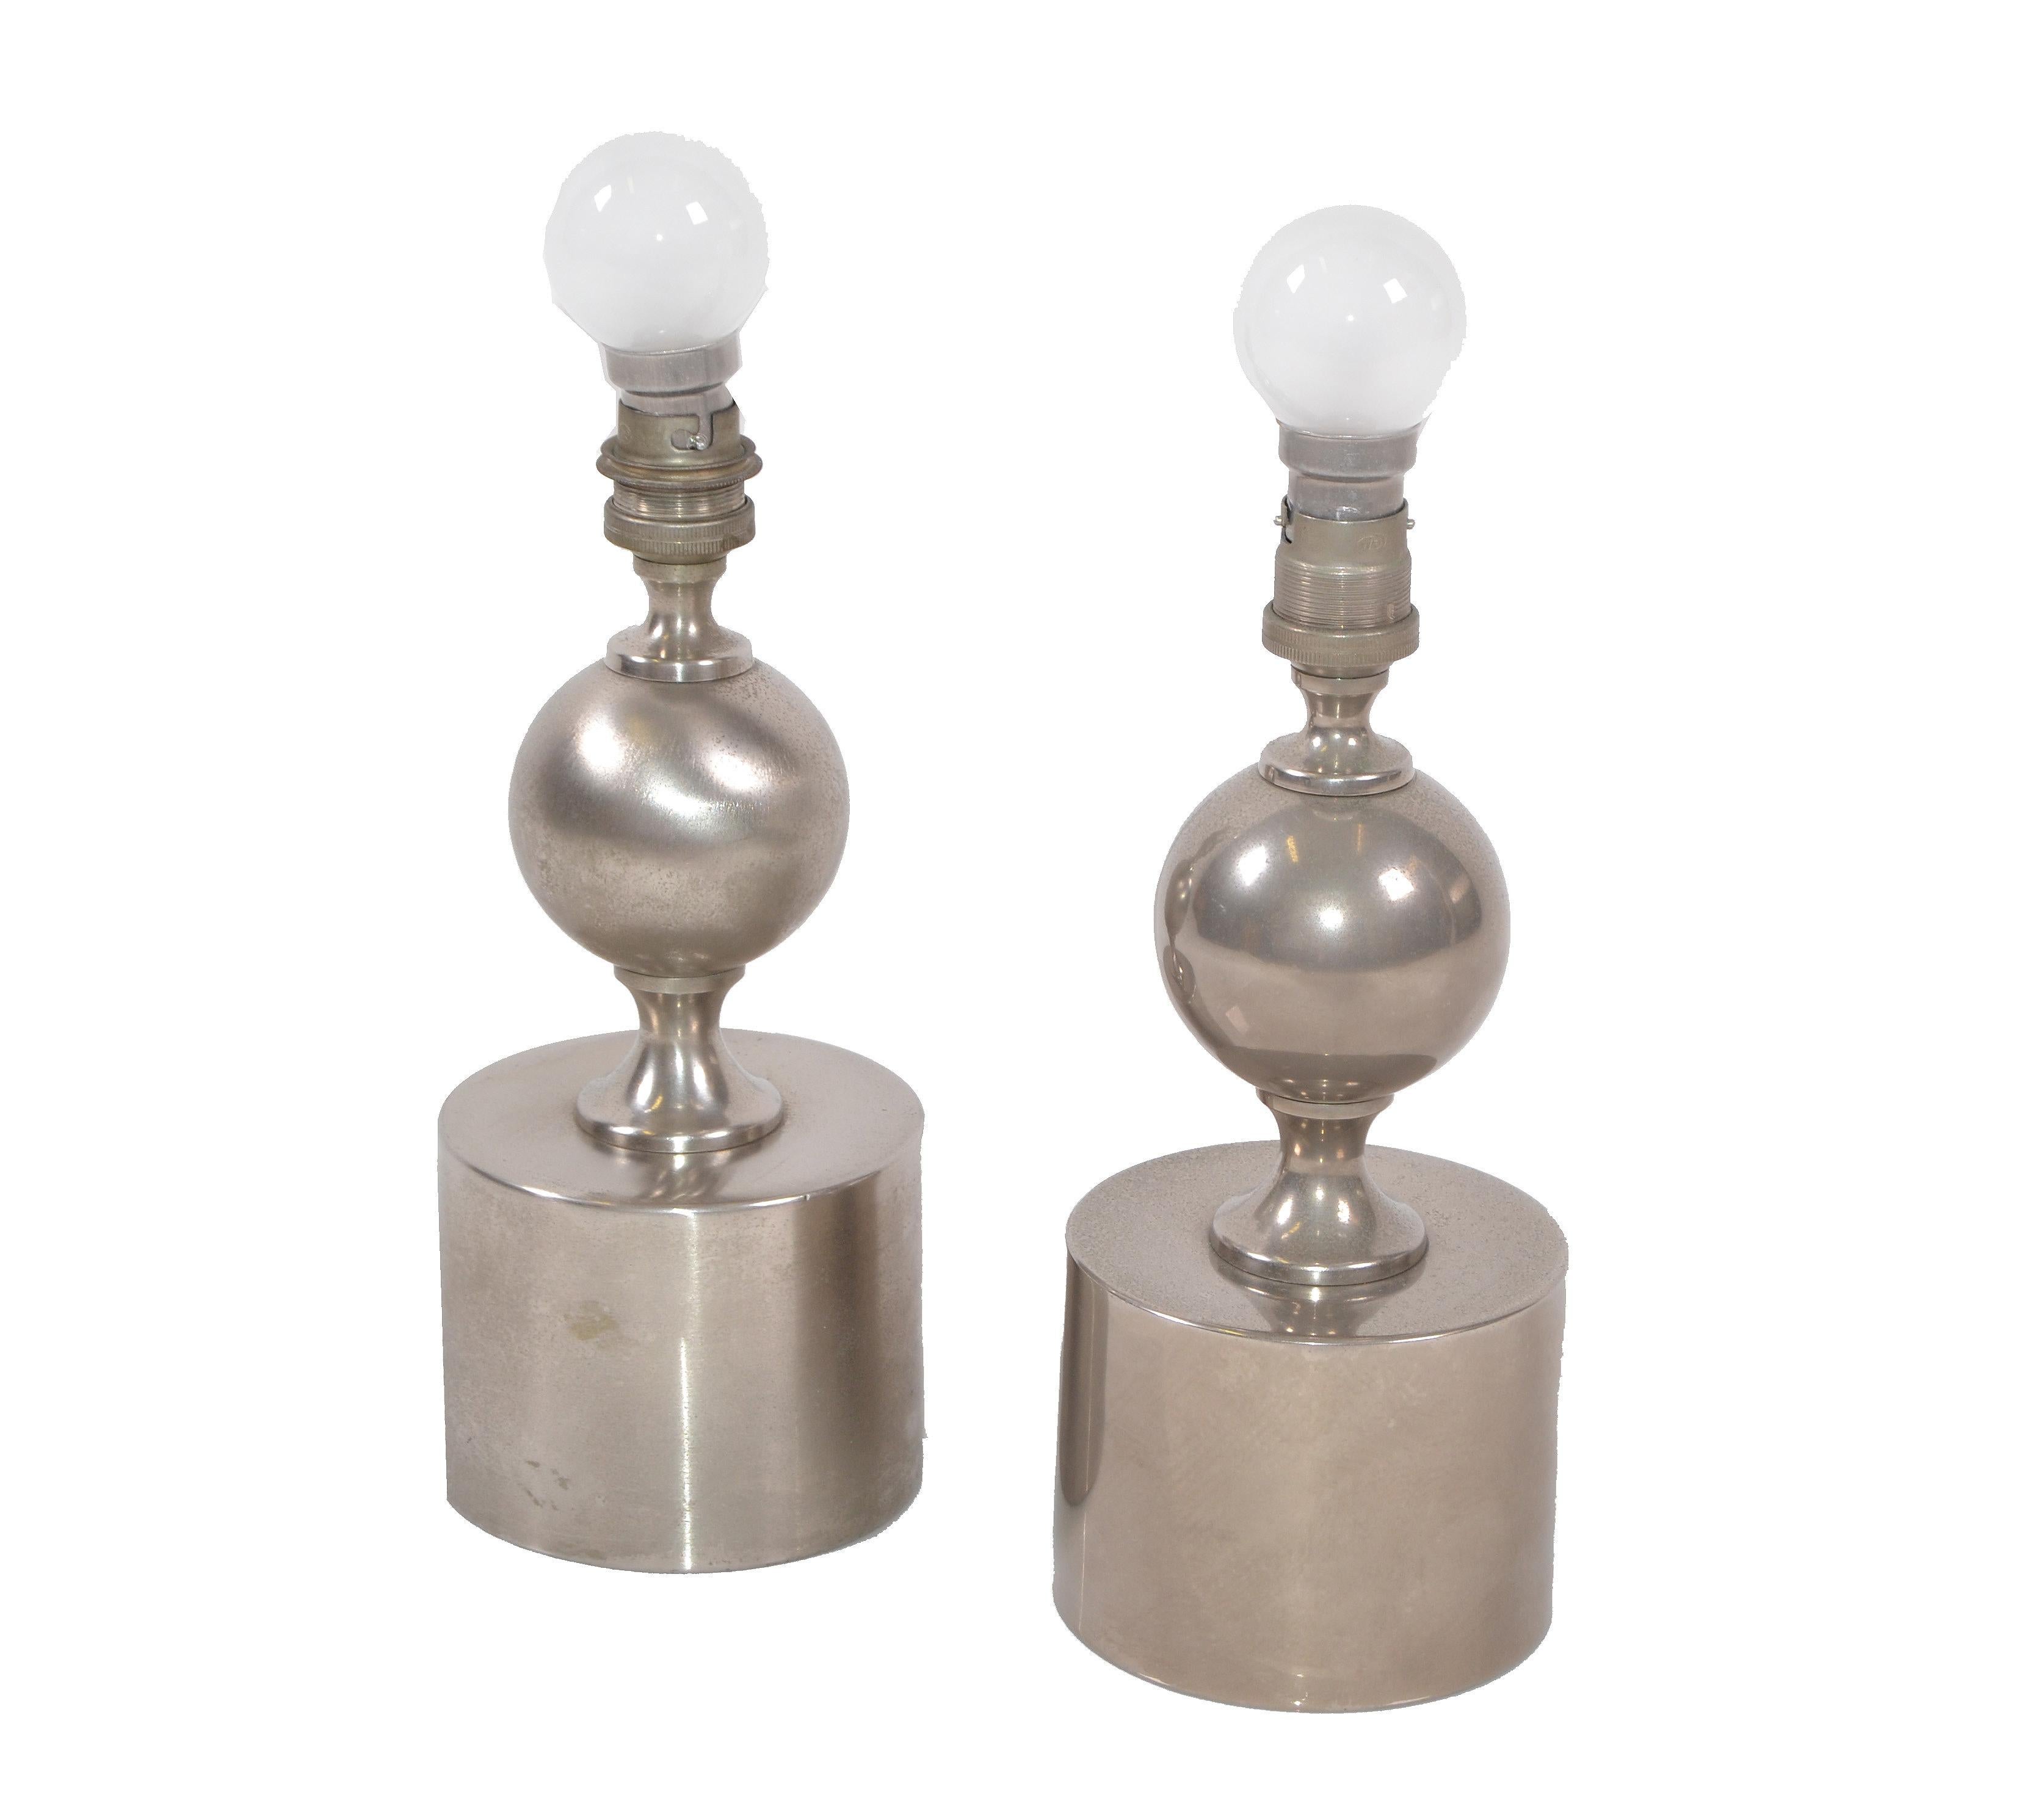 Pair of small polished steel French Mid-Century Modern one sphere table lamps by Maison Barbier from the early 1970s.
US Rewiring and each lamp takes one light bulb max. 40 watts or LED bulbs.